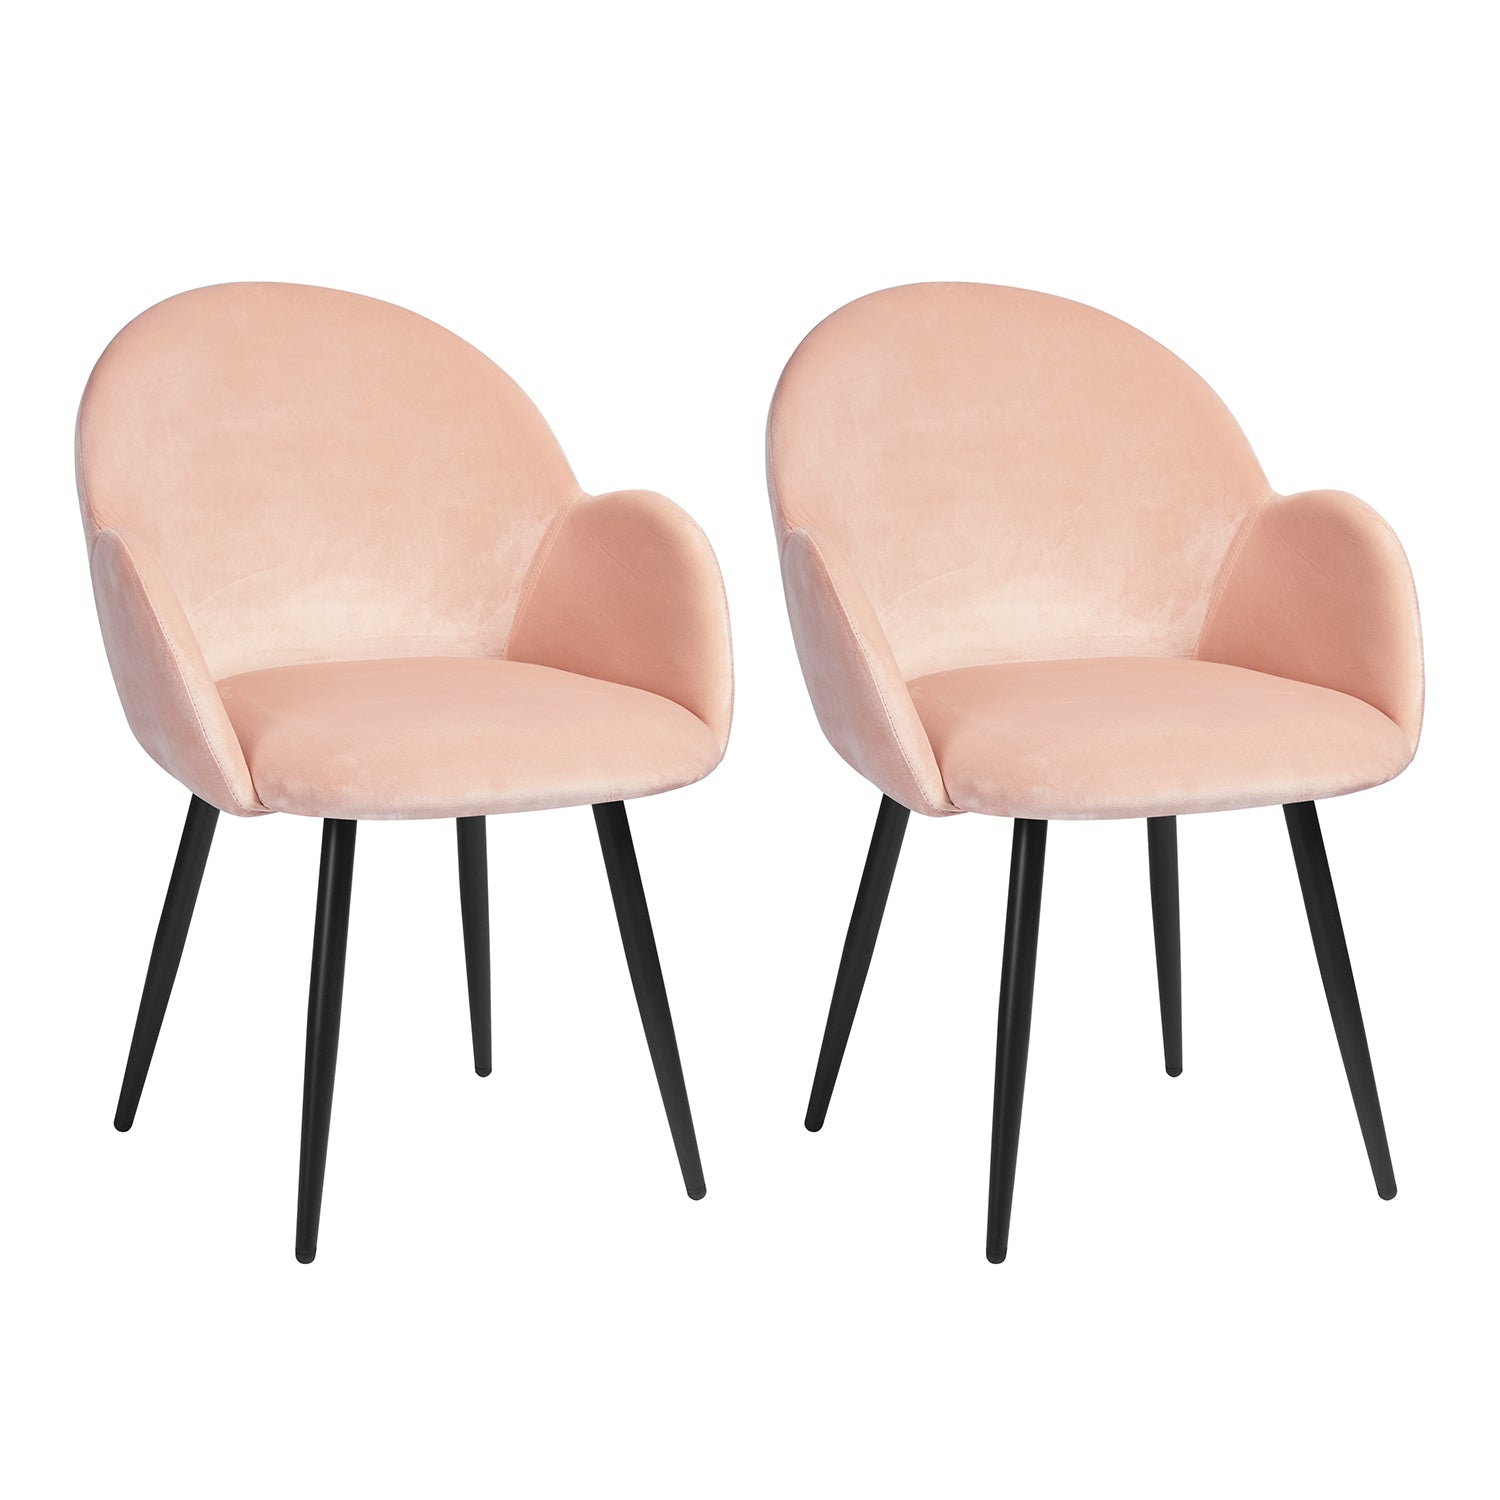 Set of 2 Scandinavian dining chairs in pink fabric - CHIOZZA EVENING SAND